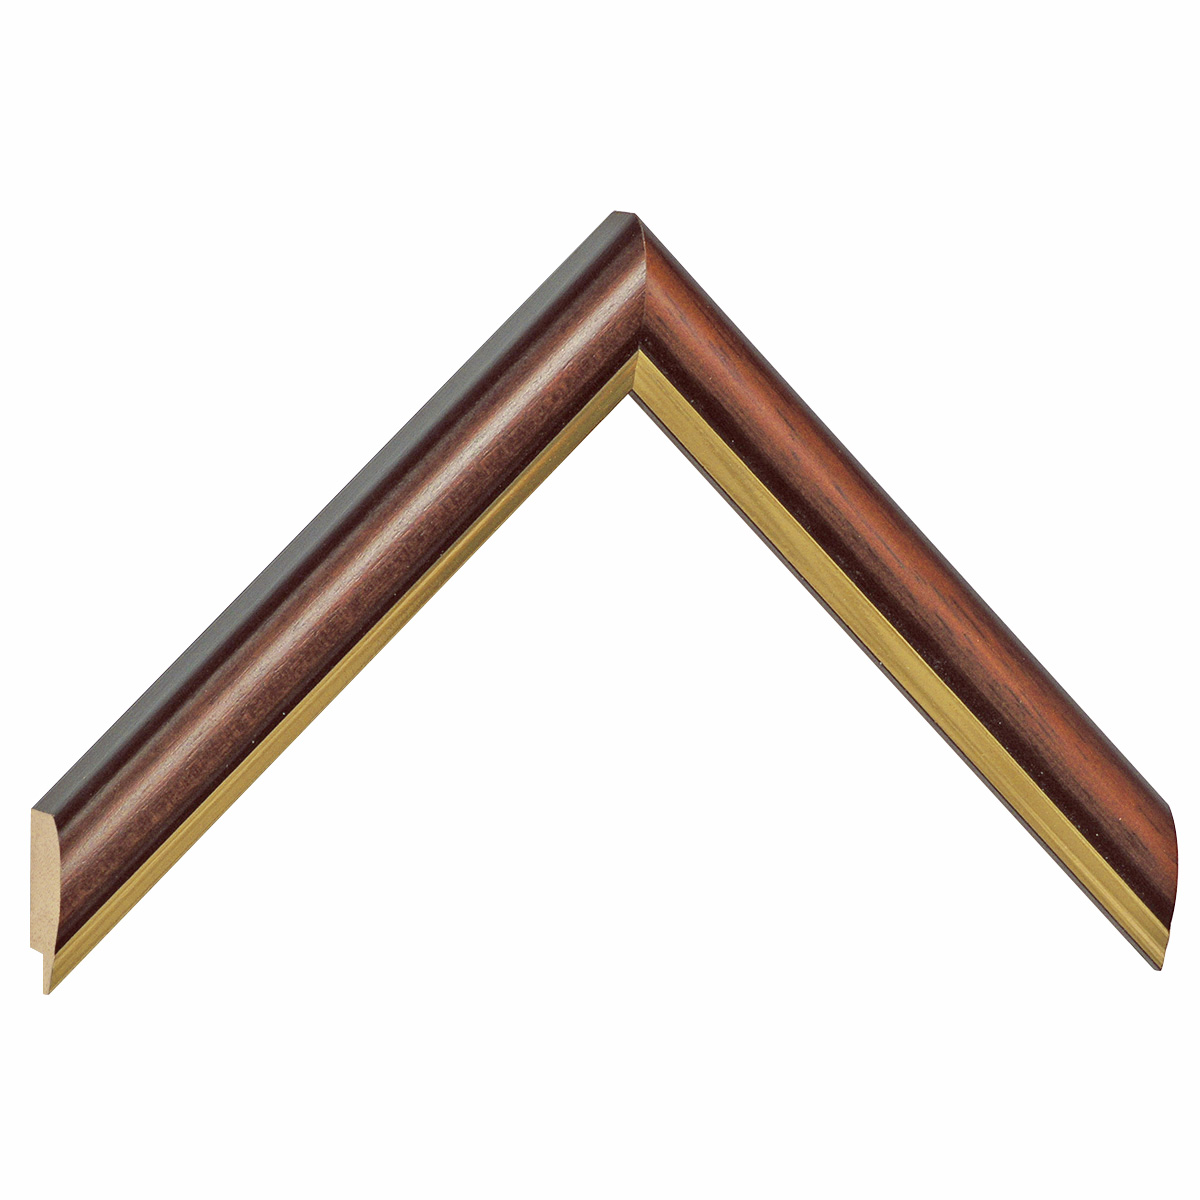 Moulding ayous jointed 23mm - antique walnut with gold edge - Sample